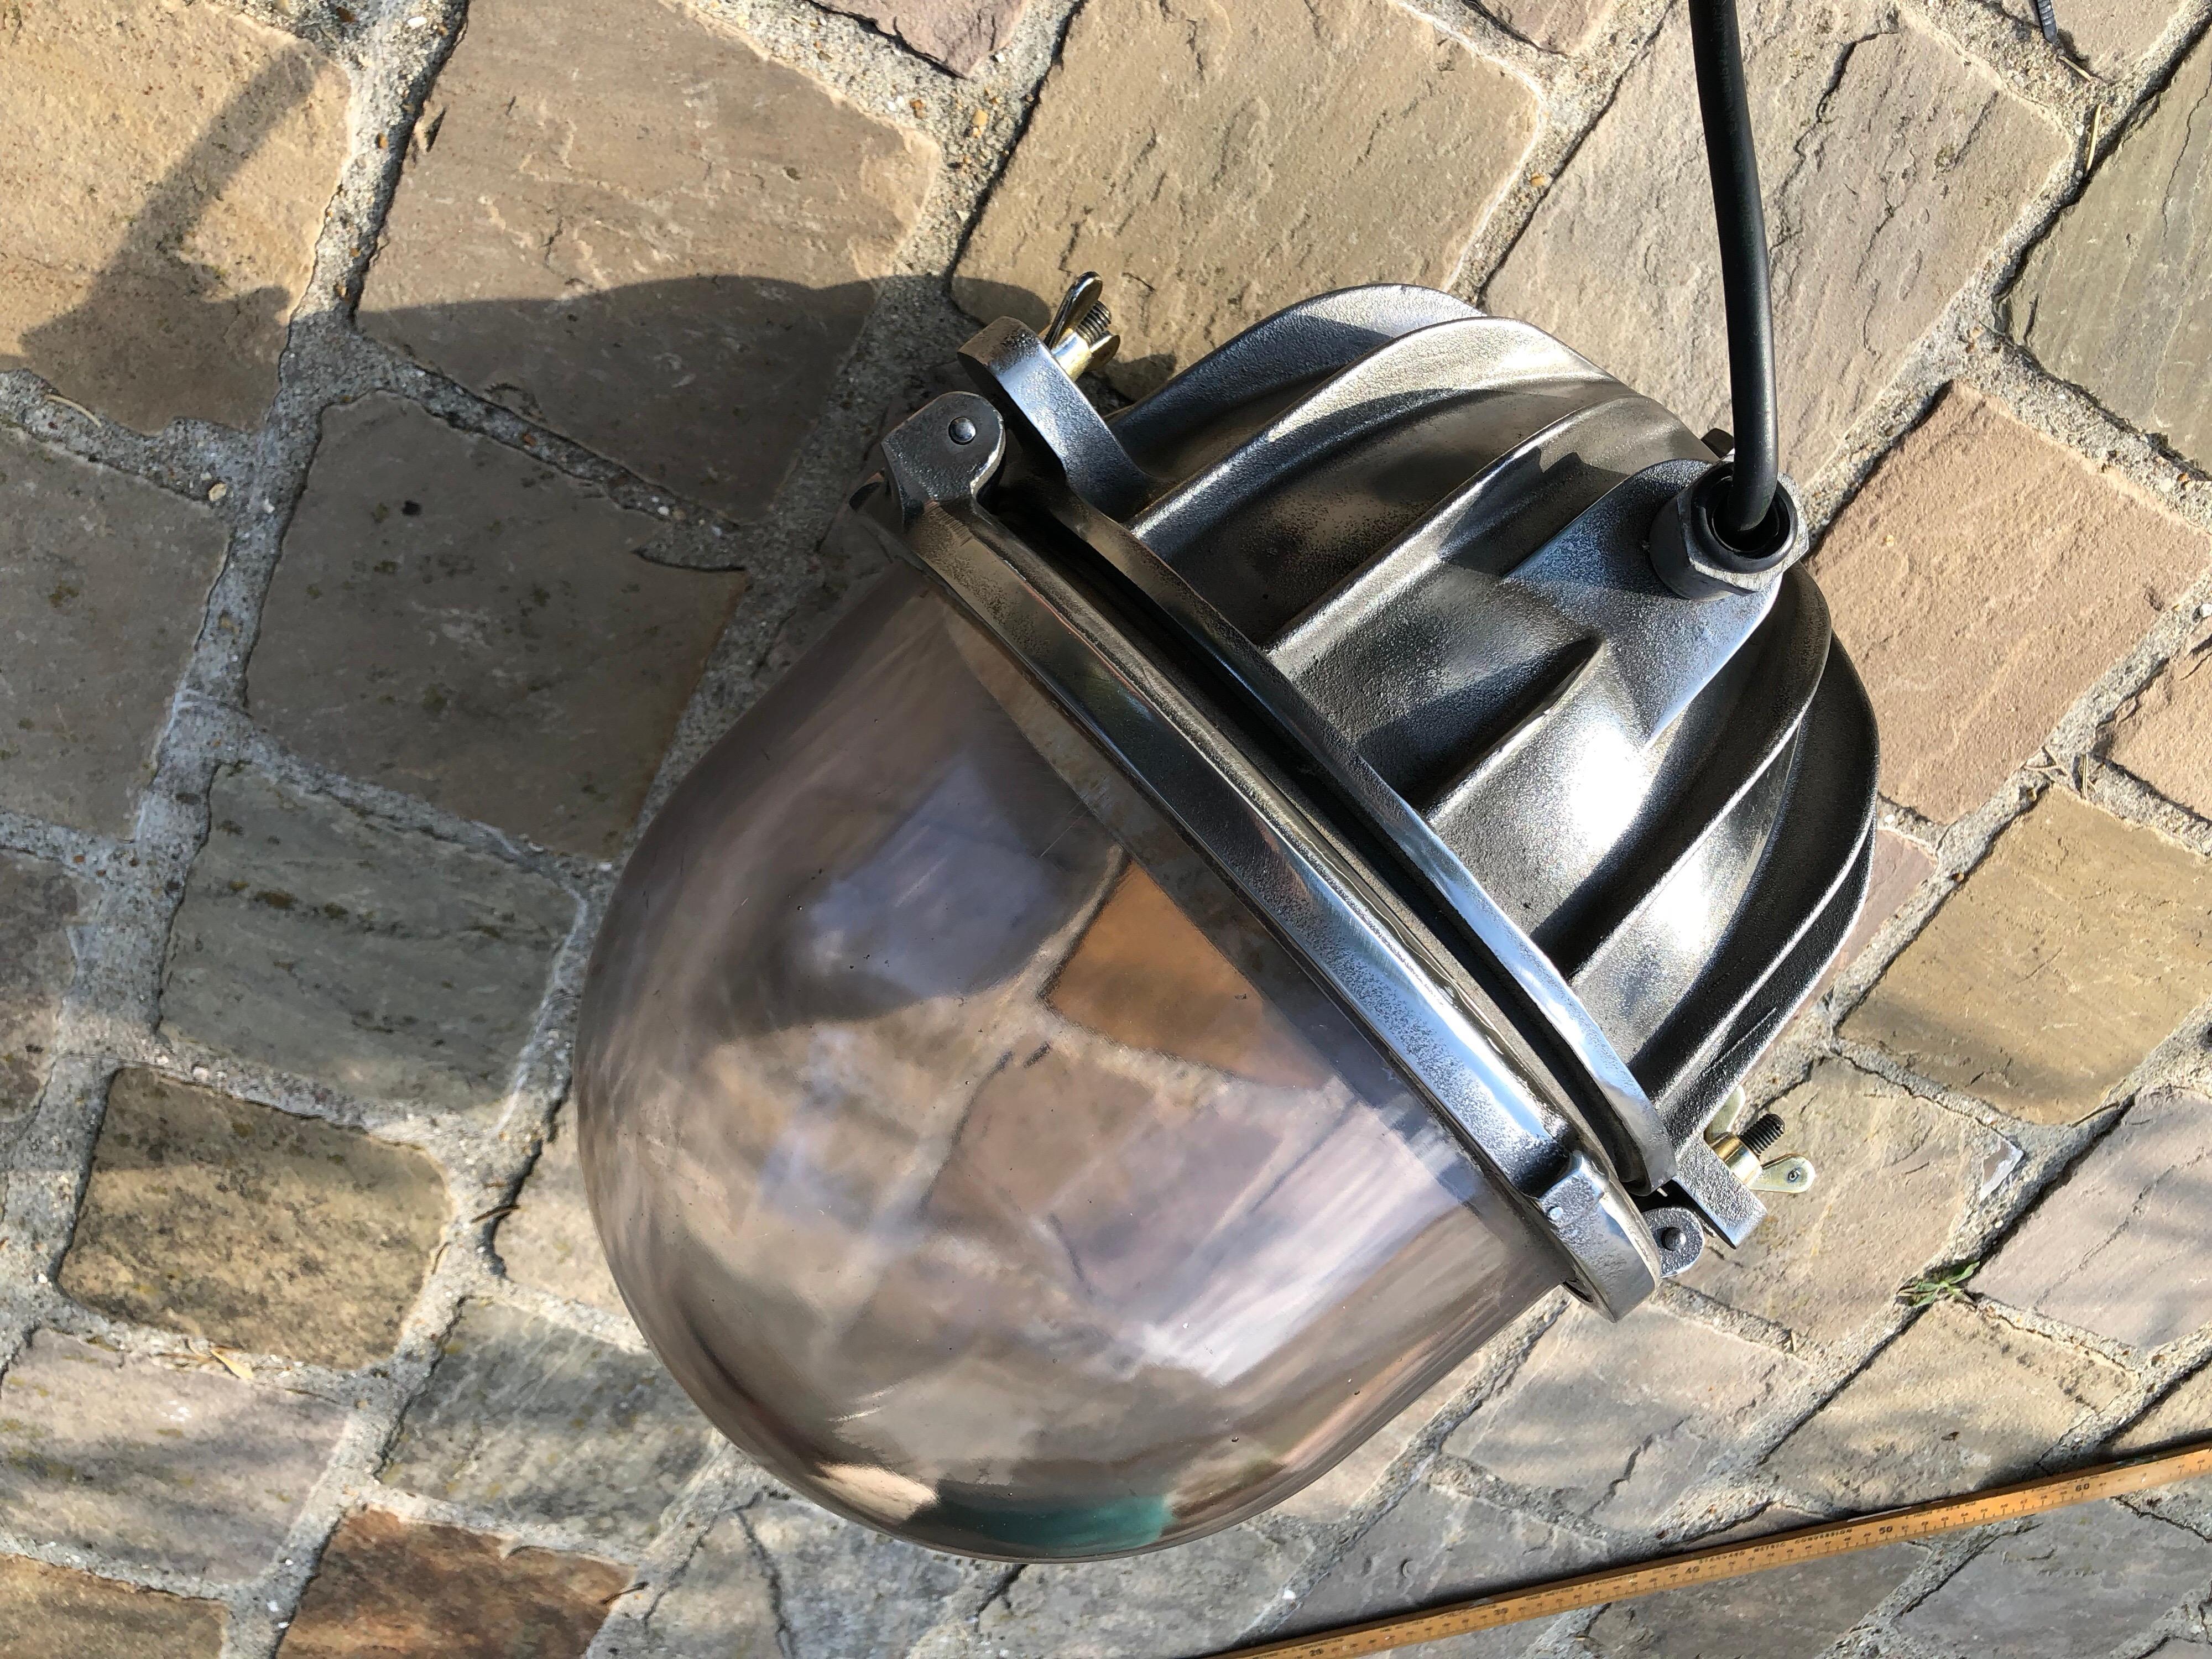 This airfield light is a rare unique Industrial piece of lighting. I has a very thick explosion proof glass dome, very slightly tainted purple, and a massive cast iron base with beautiful metal fins which were designed to evacuate the heat of the